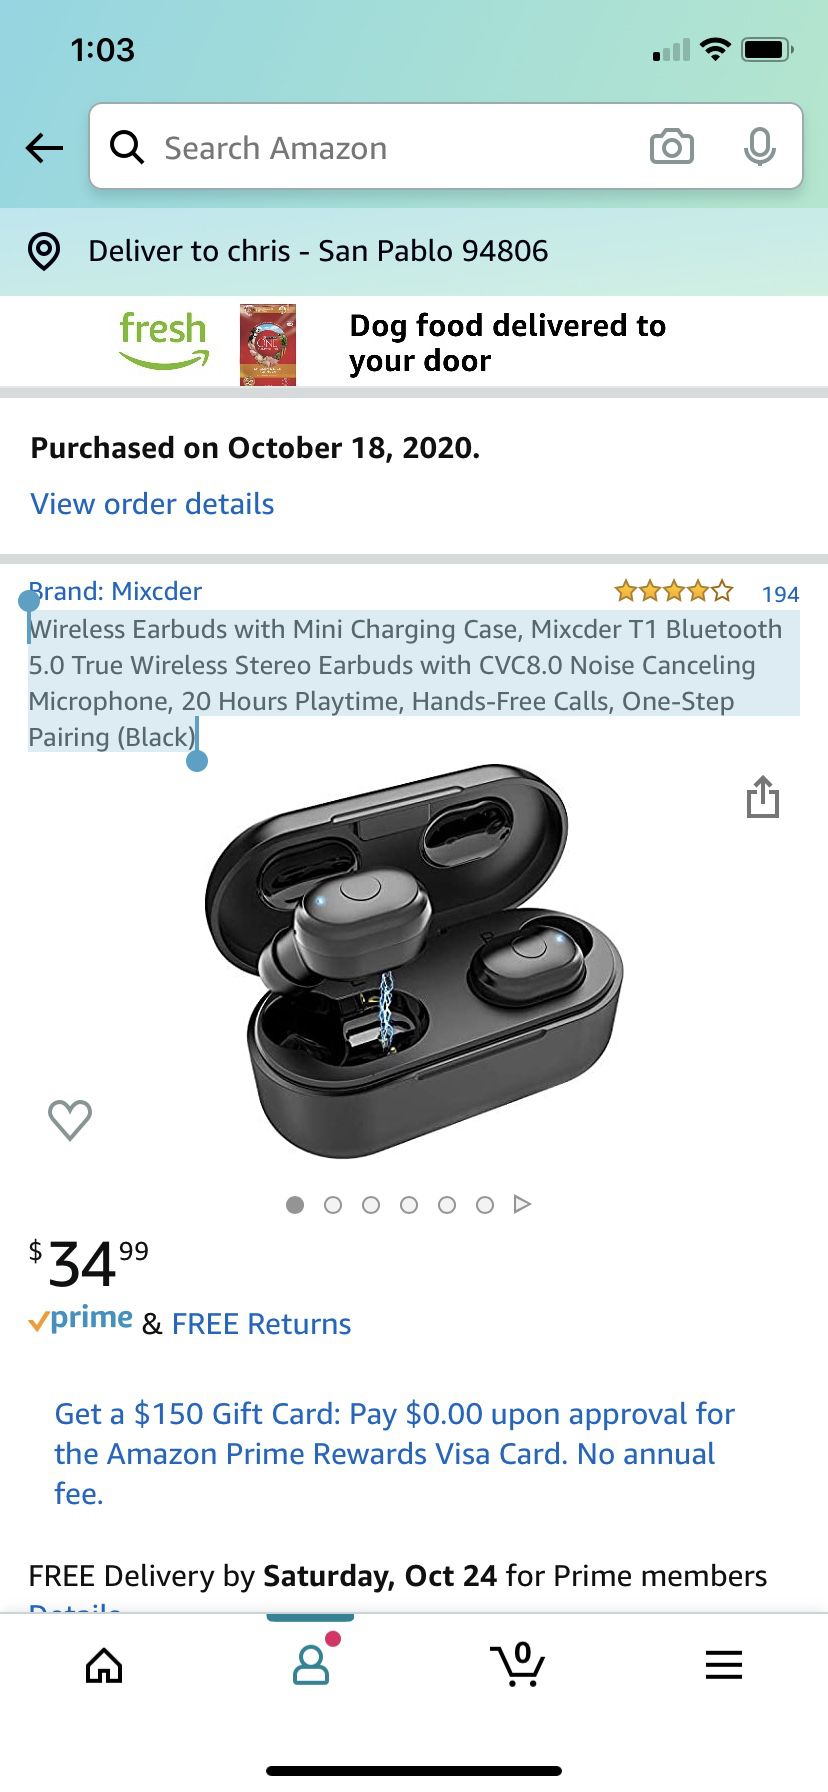 Wireless Earbuds with Mini Charging Case, Mixcder T1 Bluetooth 5.0 True Wireless Stereo Earbuds with CVC8.0 Noise Canceling Microphone, 20 Hours Play